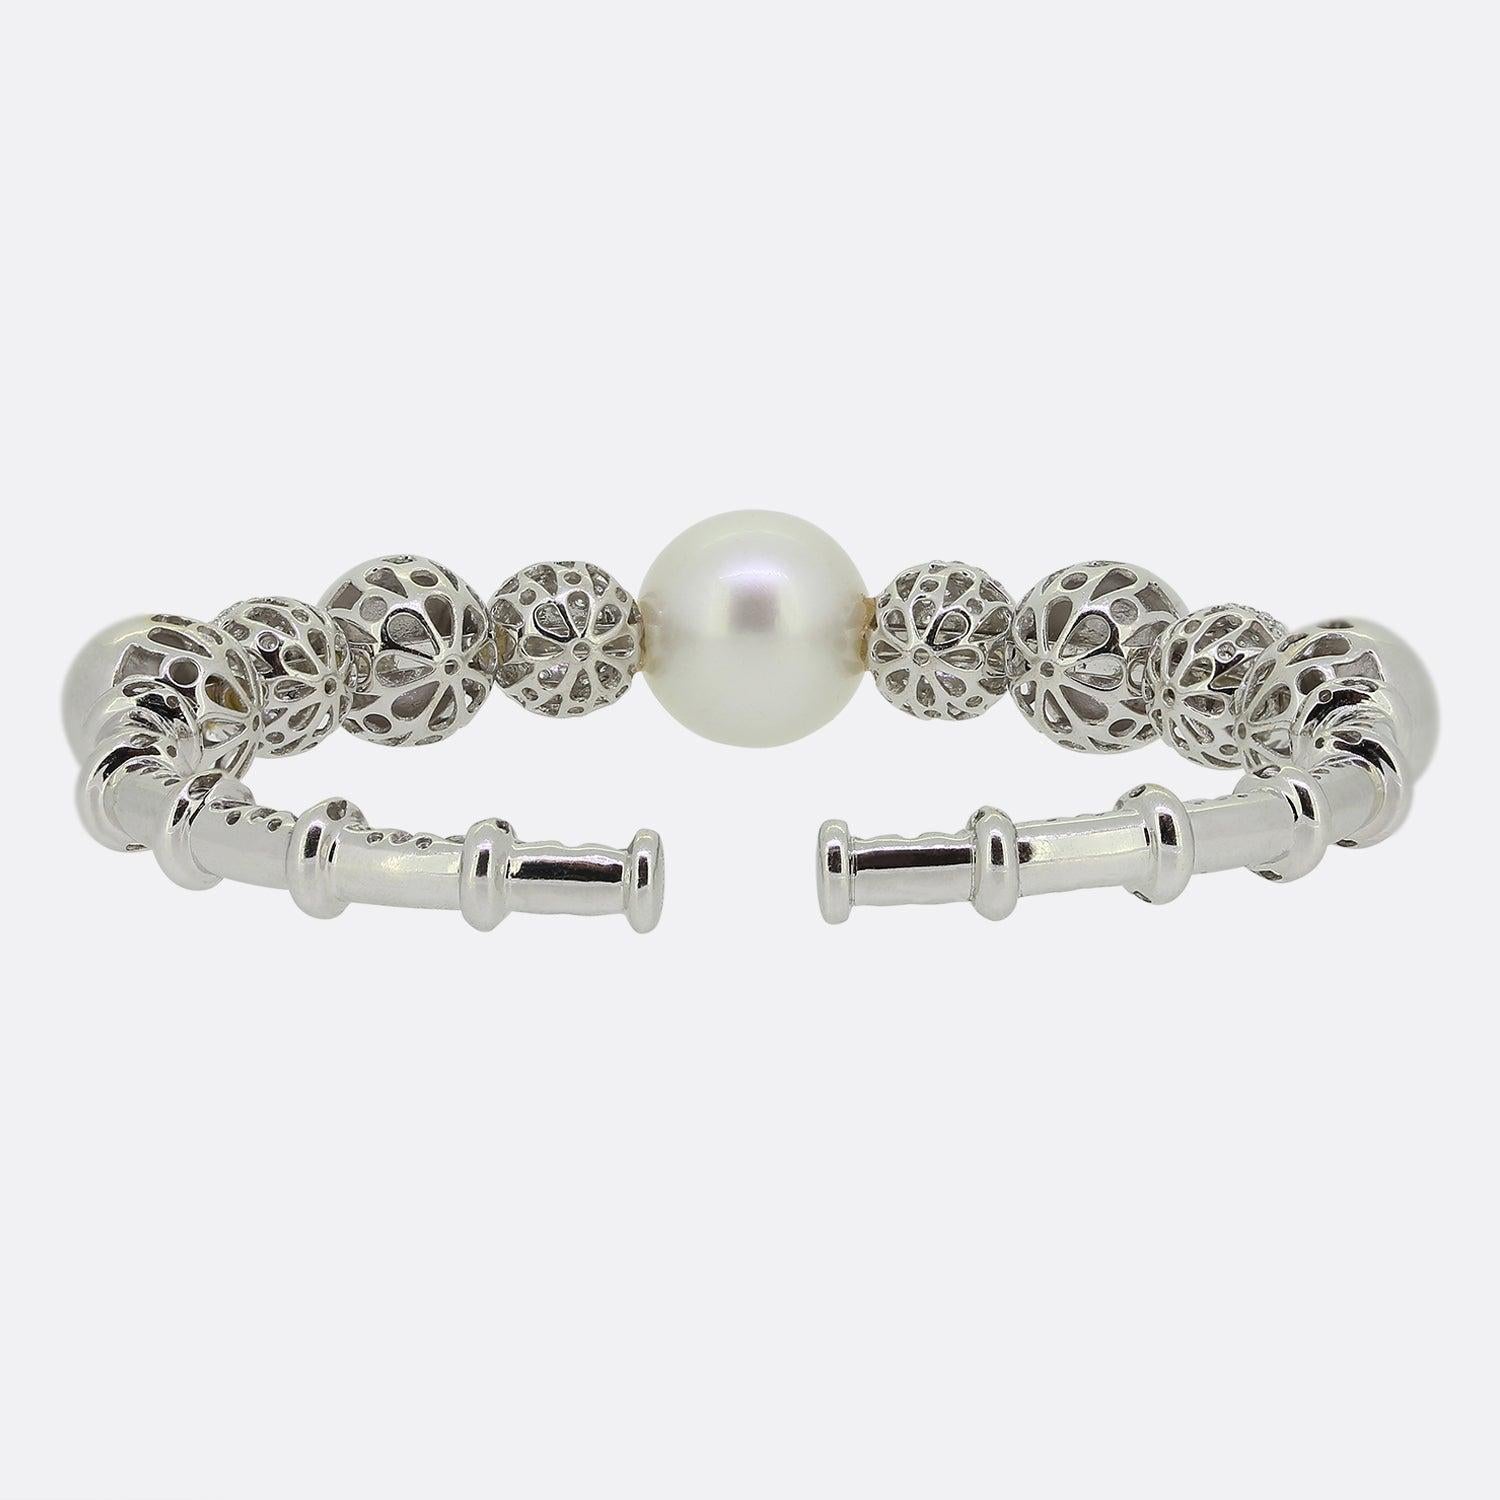 This is an 18ct white gold bangle from Yoko London. This elegant piece features a large lustrous South Sea pearl offset by four white gold spheres on either side. These spherical motifs alternate between a plain polished finished and being pave set